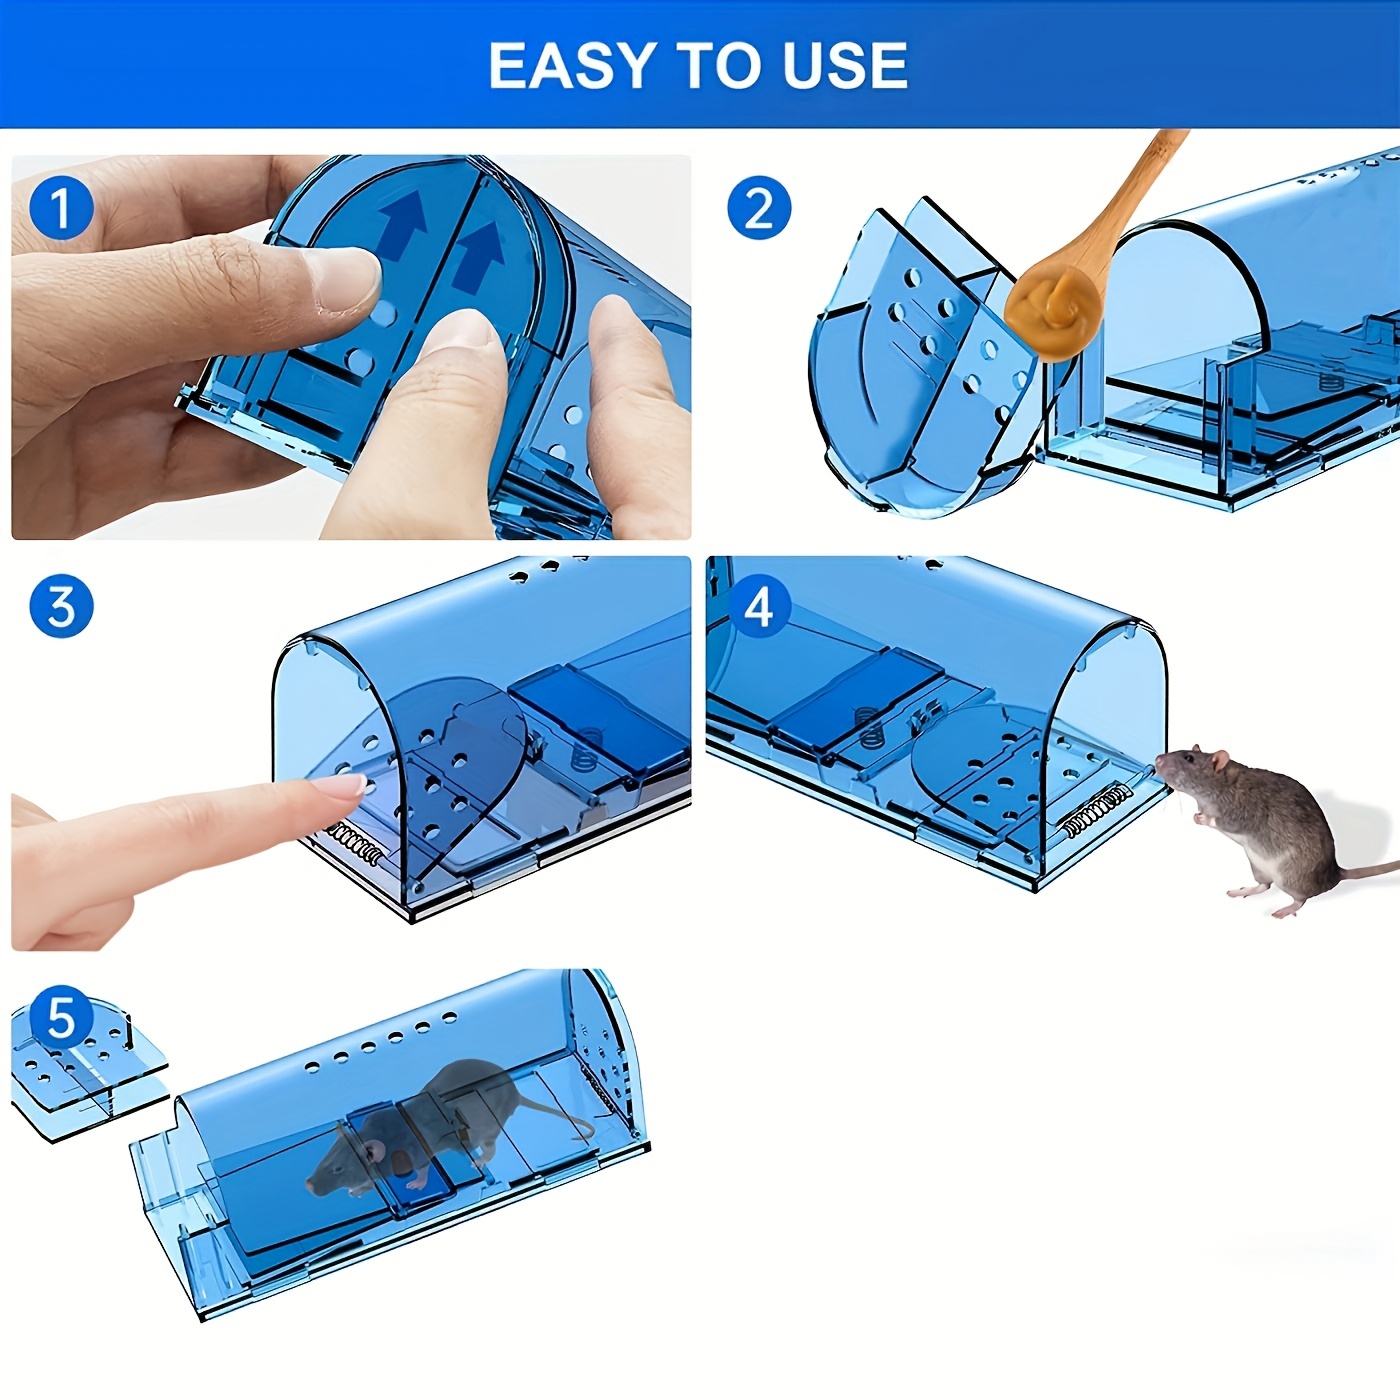 Humane Mouse Traps Indoor for Home - Mouse Trap Easy to Set